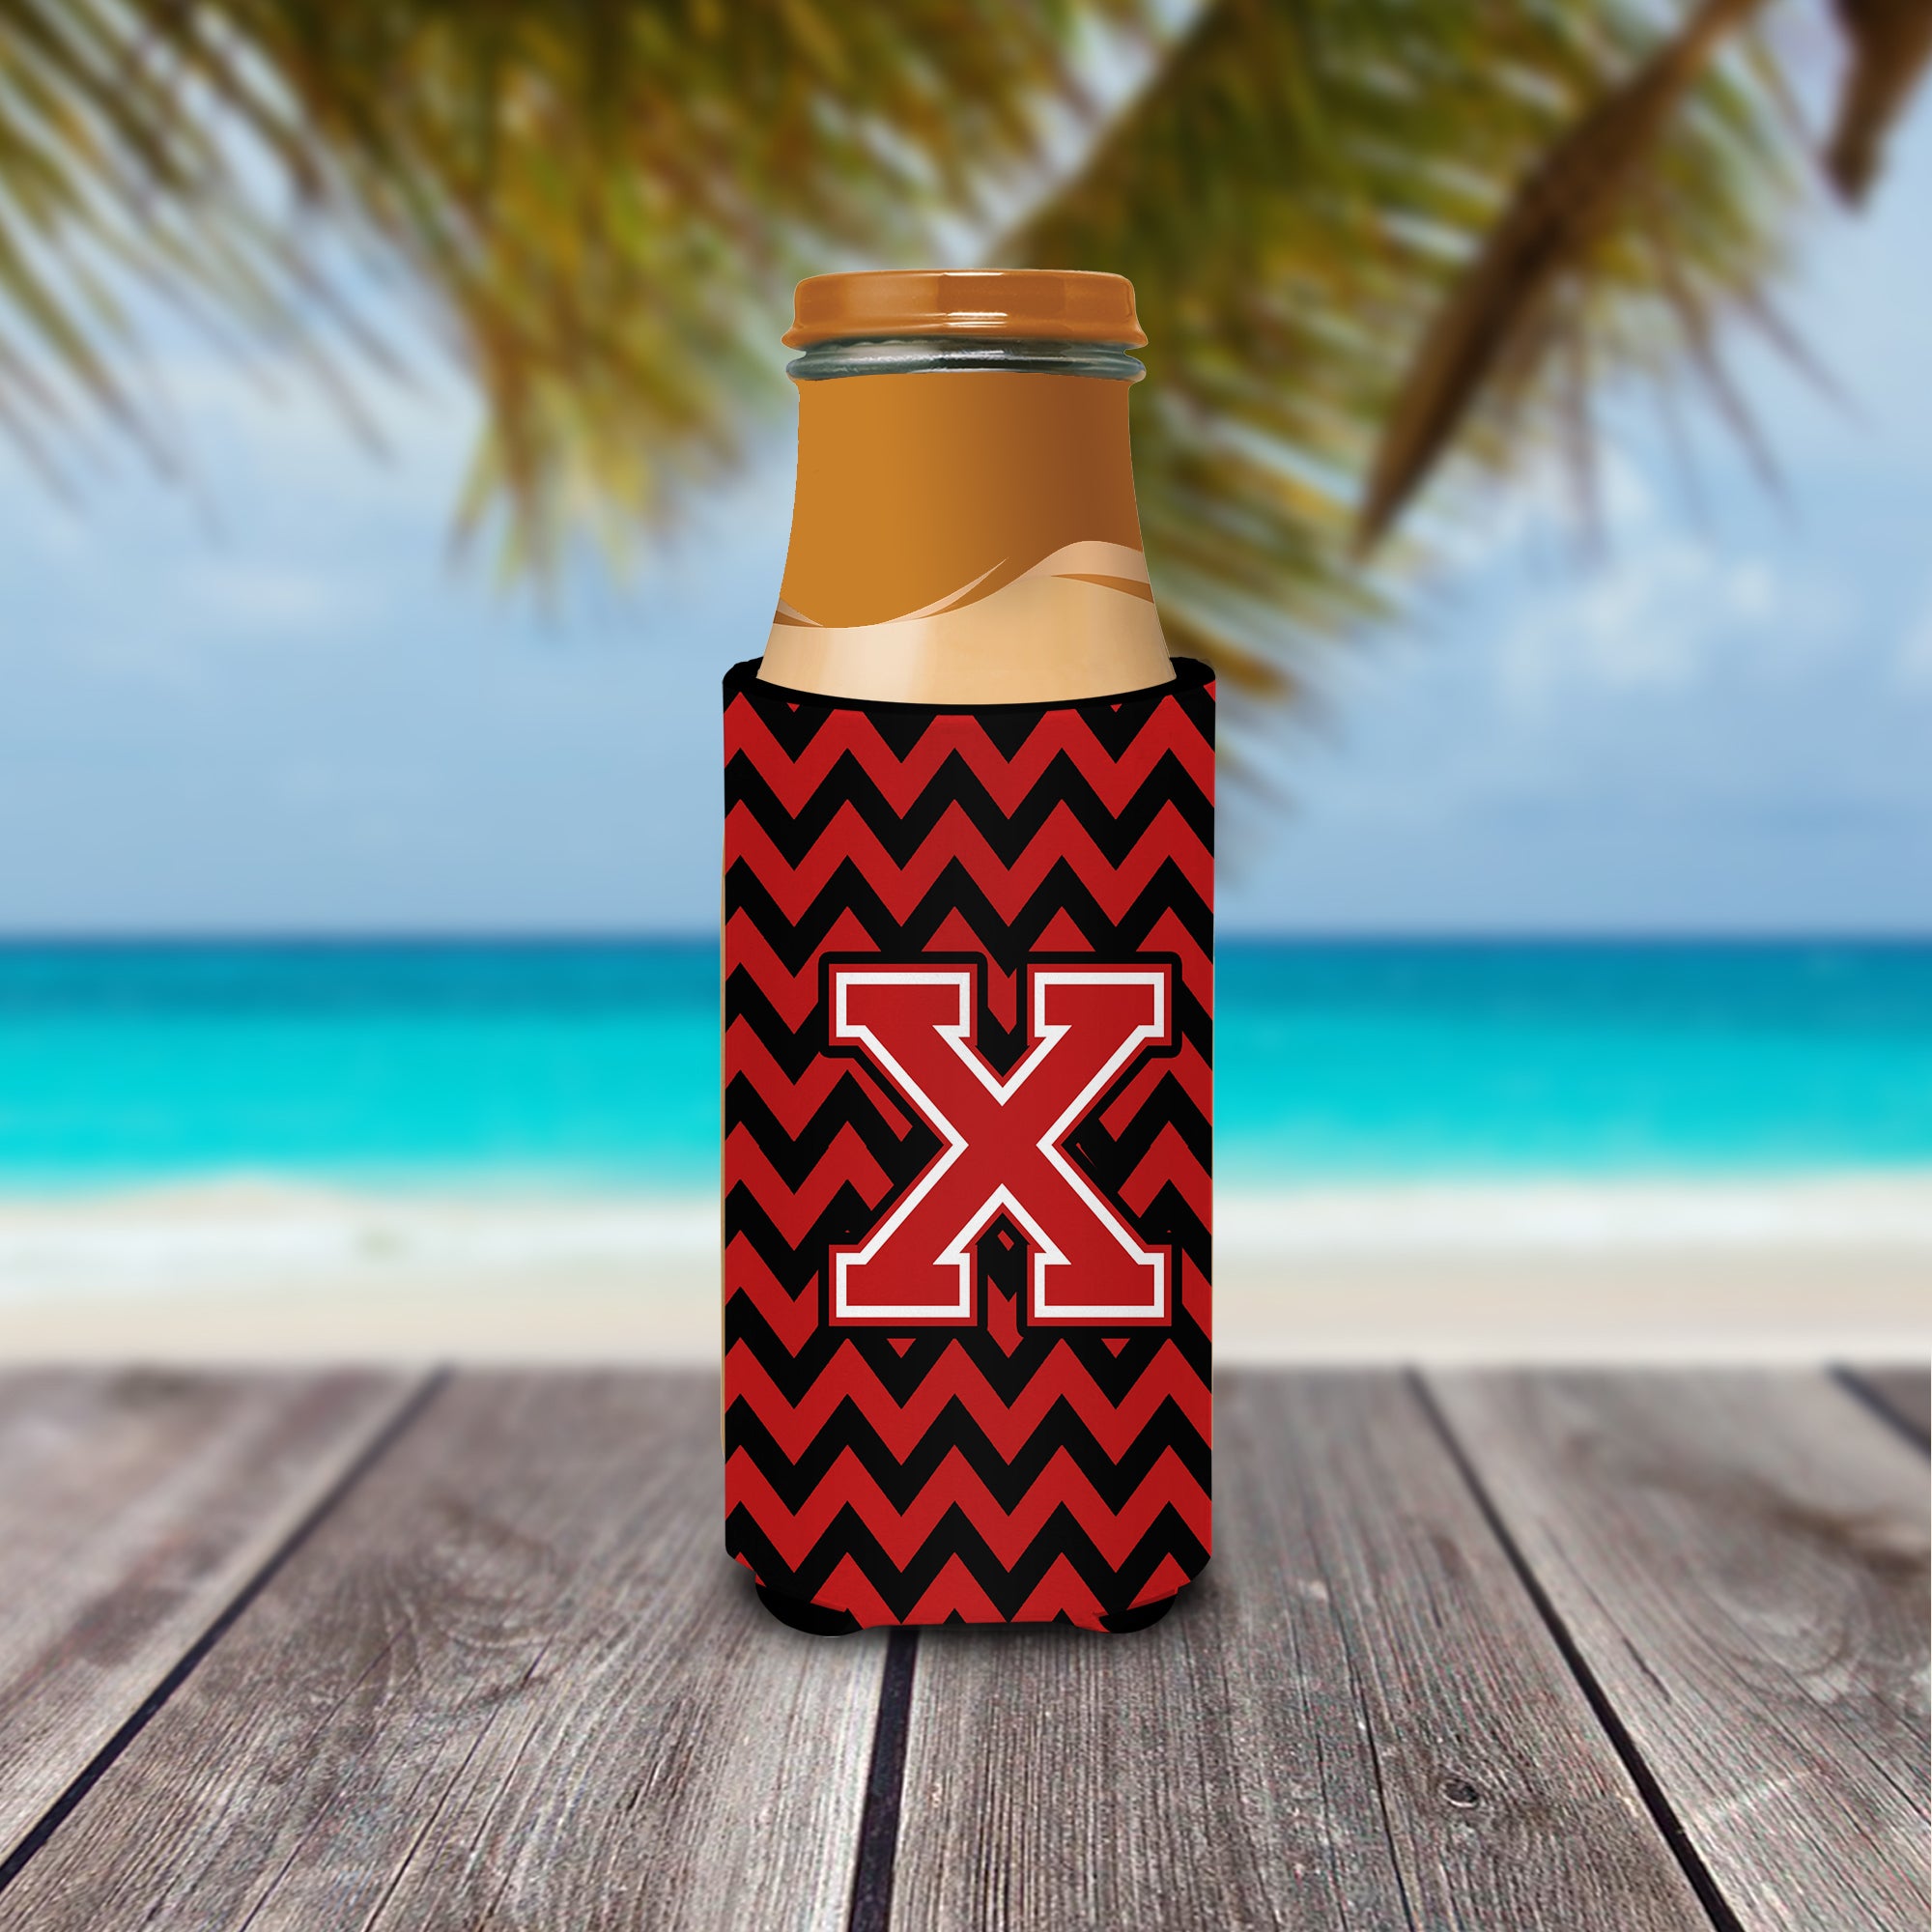 Letter X Chevron Black and Red   Ultra Beverage Insulators for slim cans CJ1047-XMUK.